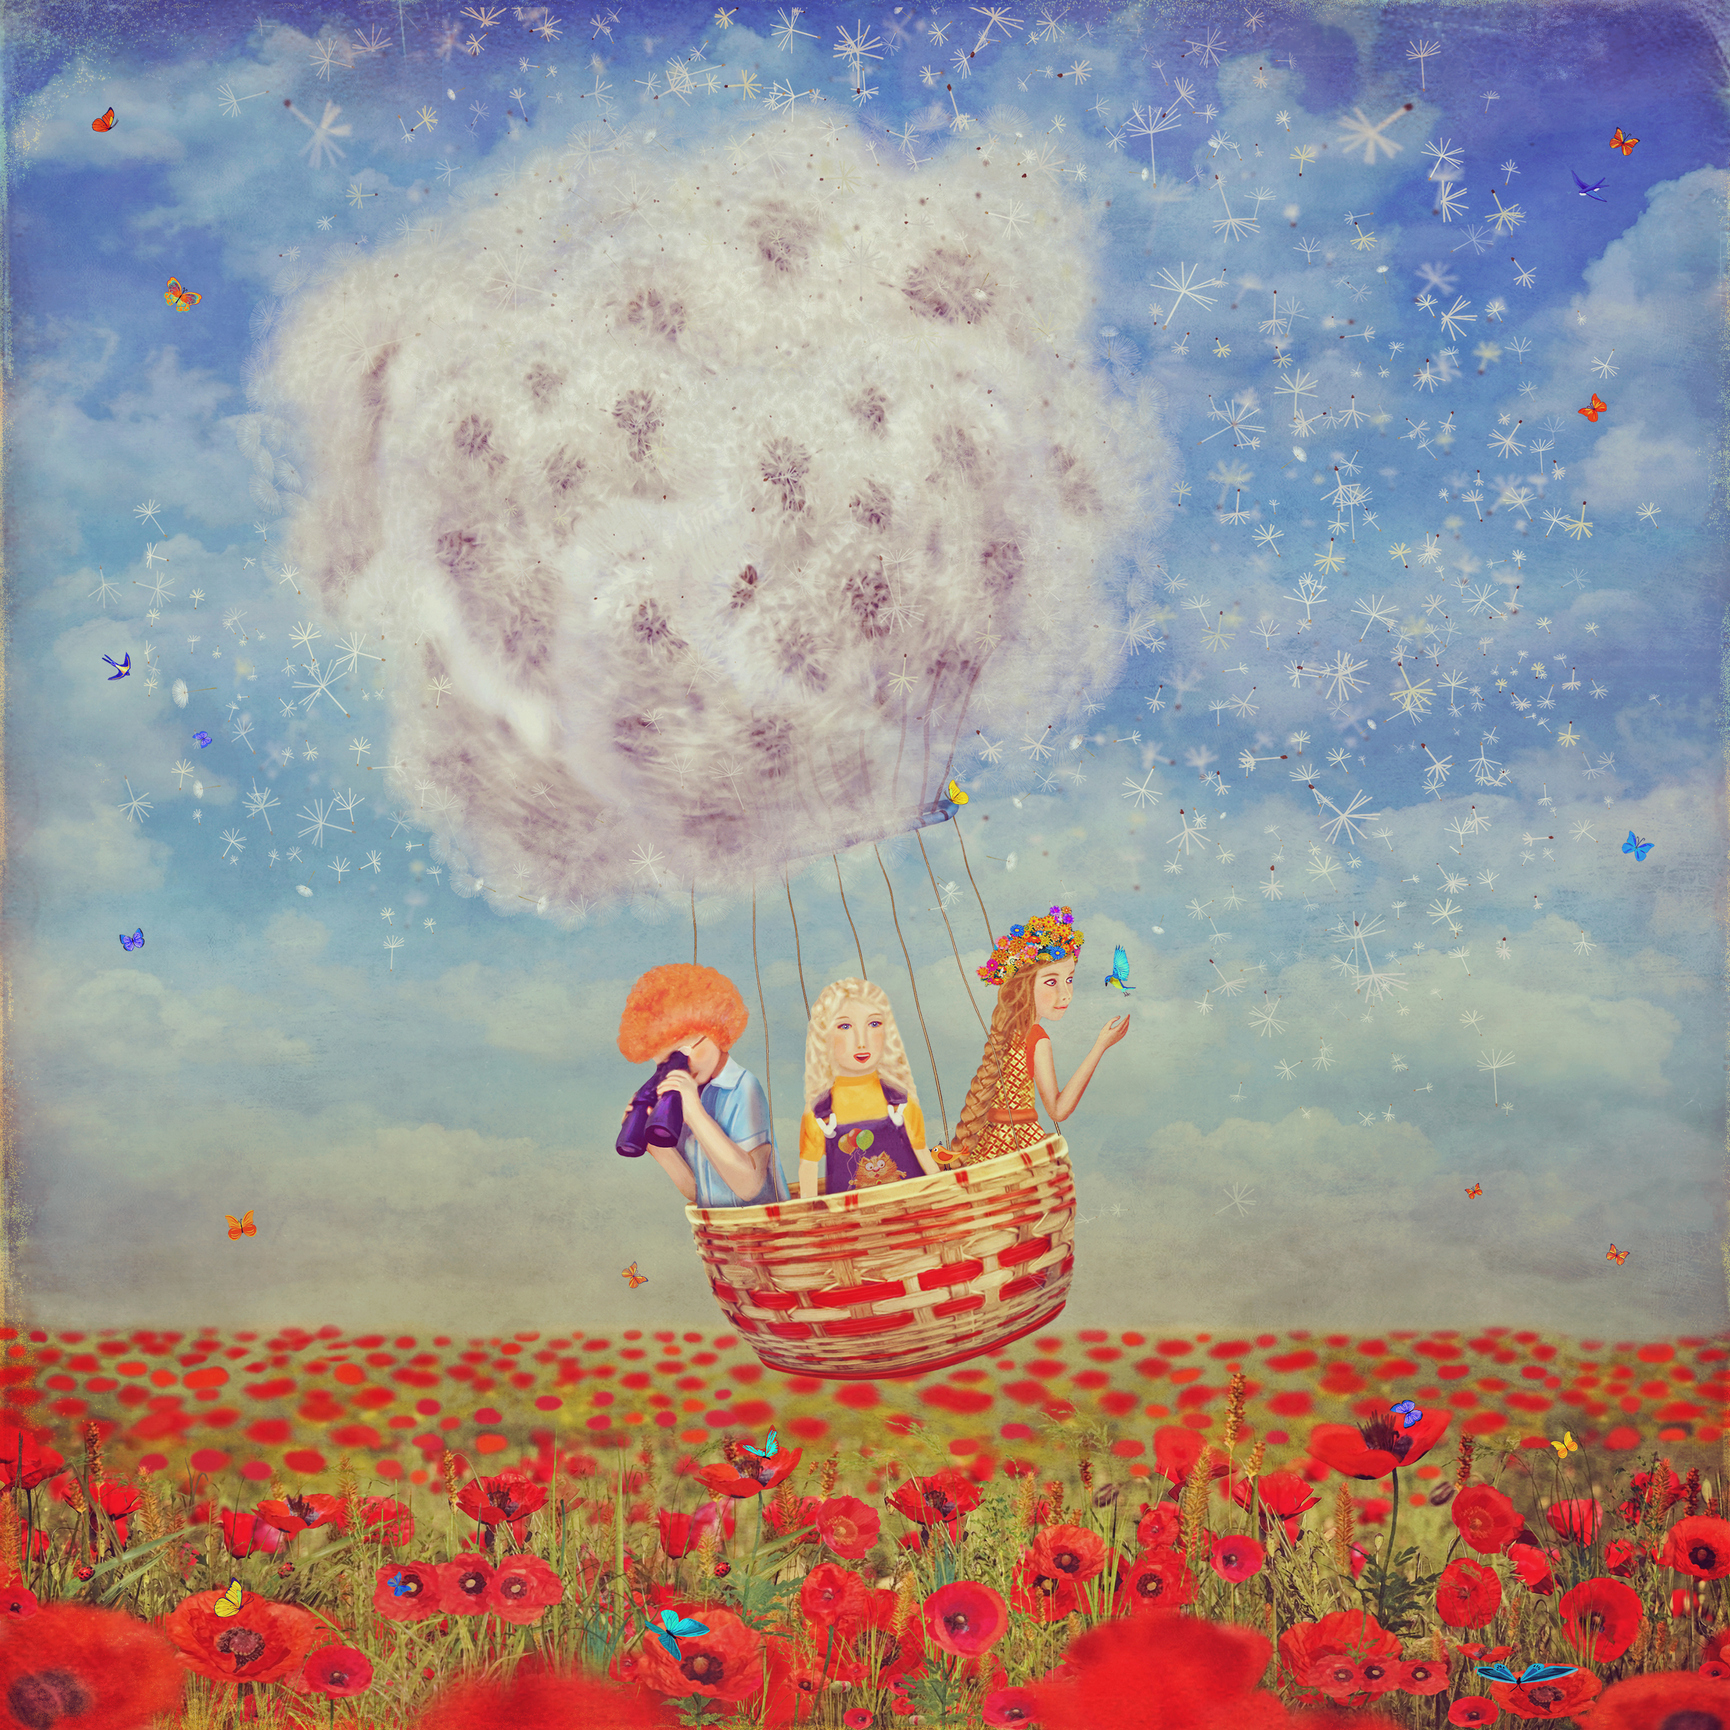 Three girls in a hot air balloon, created by dandelions. Illustration.